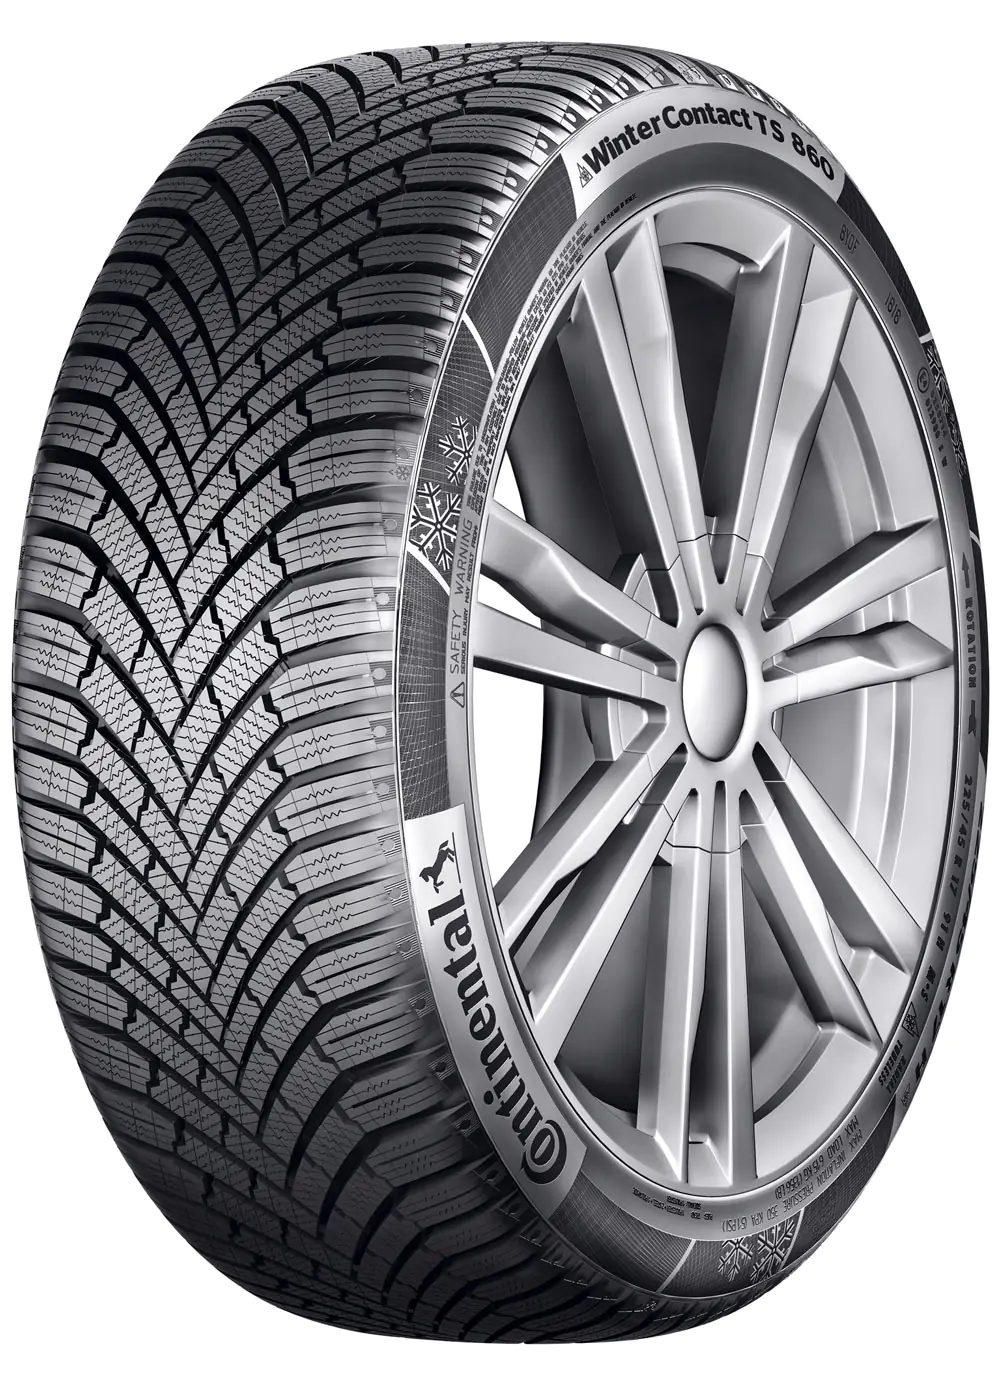 Gomme Autovettura Continental 205/45 R18 90H Ts860s FR XL M+S Invernale